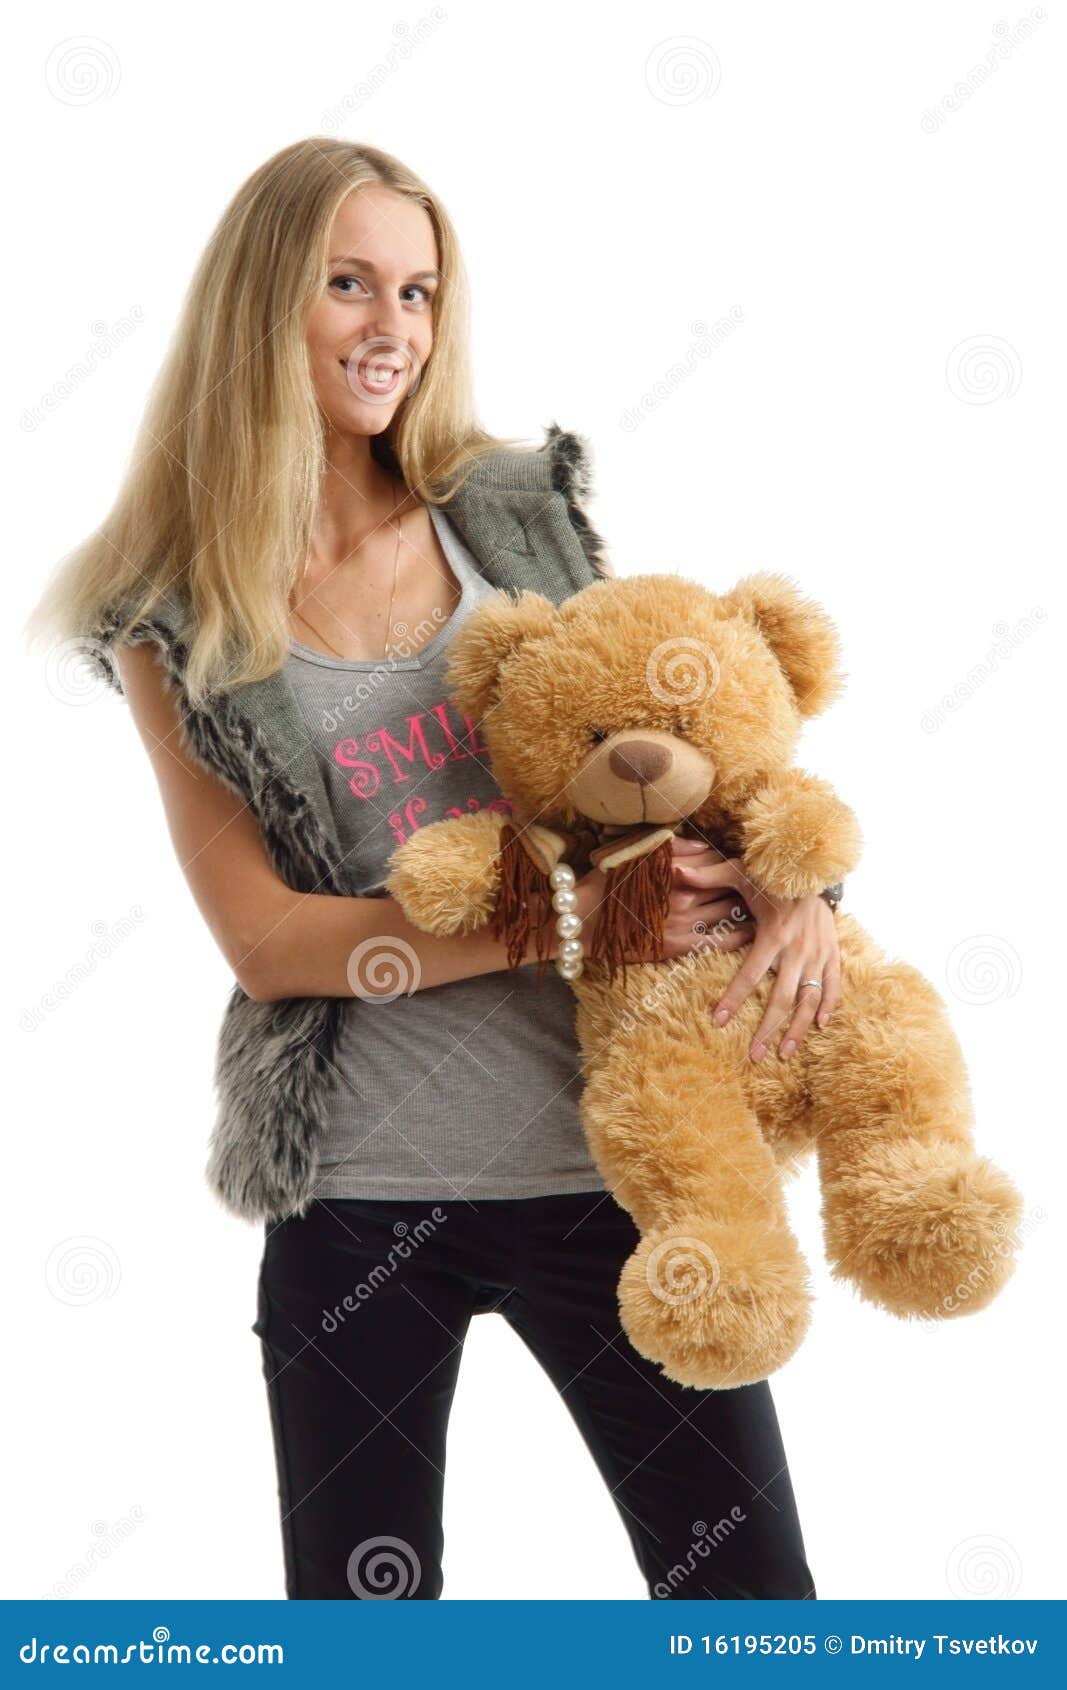 Cheerful Young Woman With Teddy Bear Royalty Free Stock Photo - Image ...